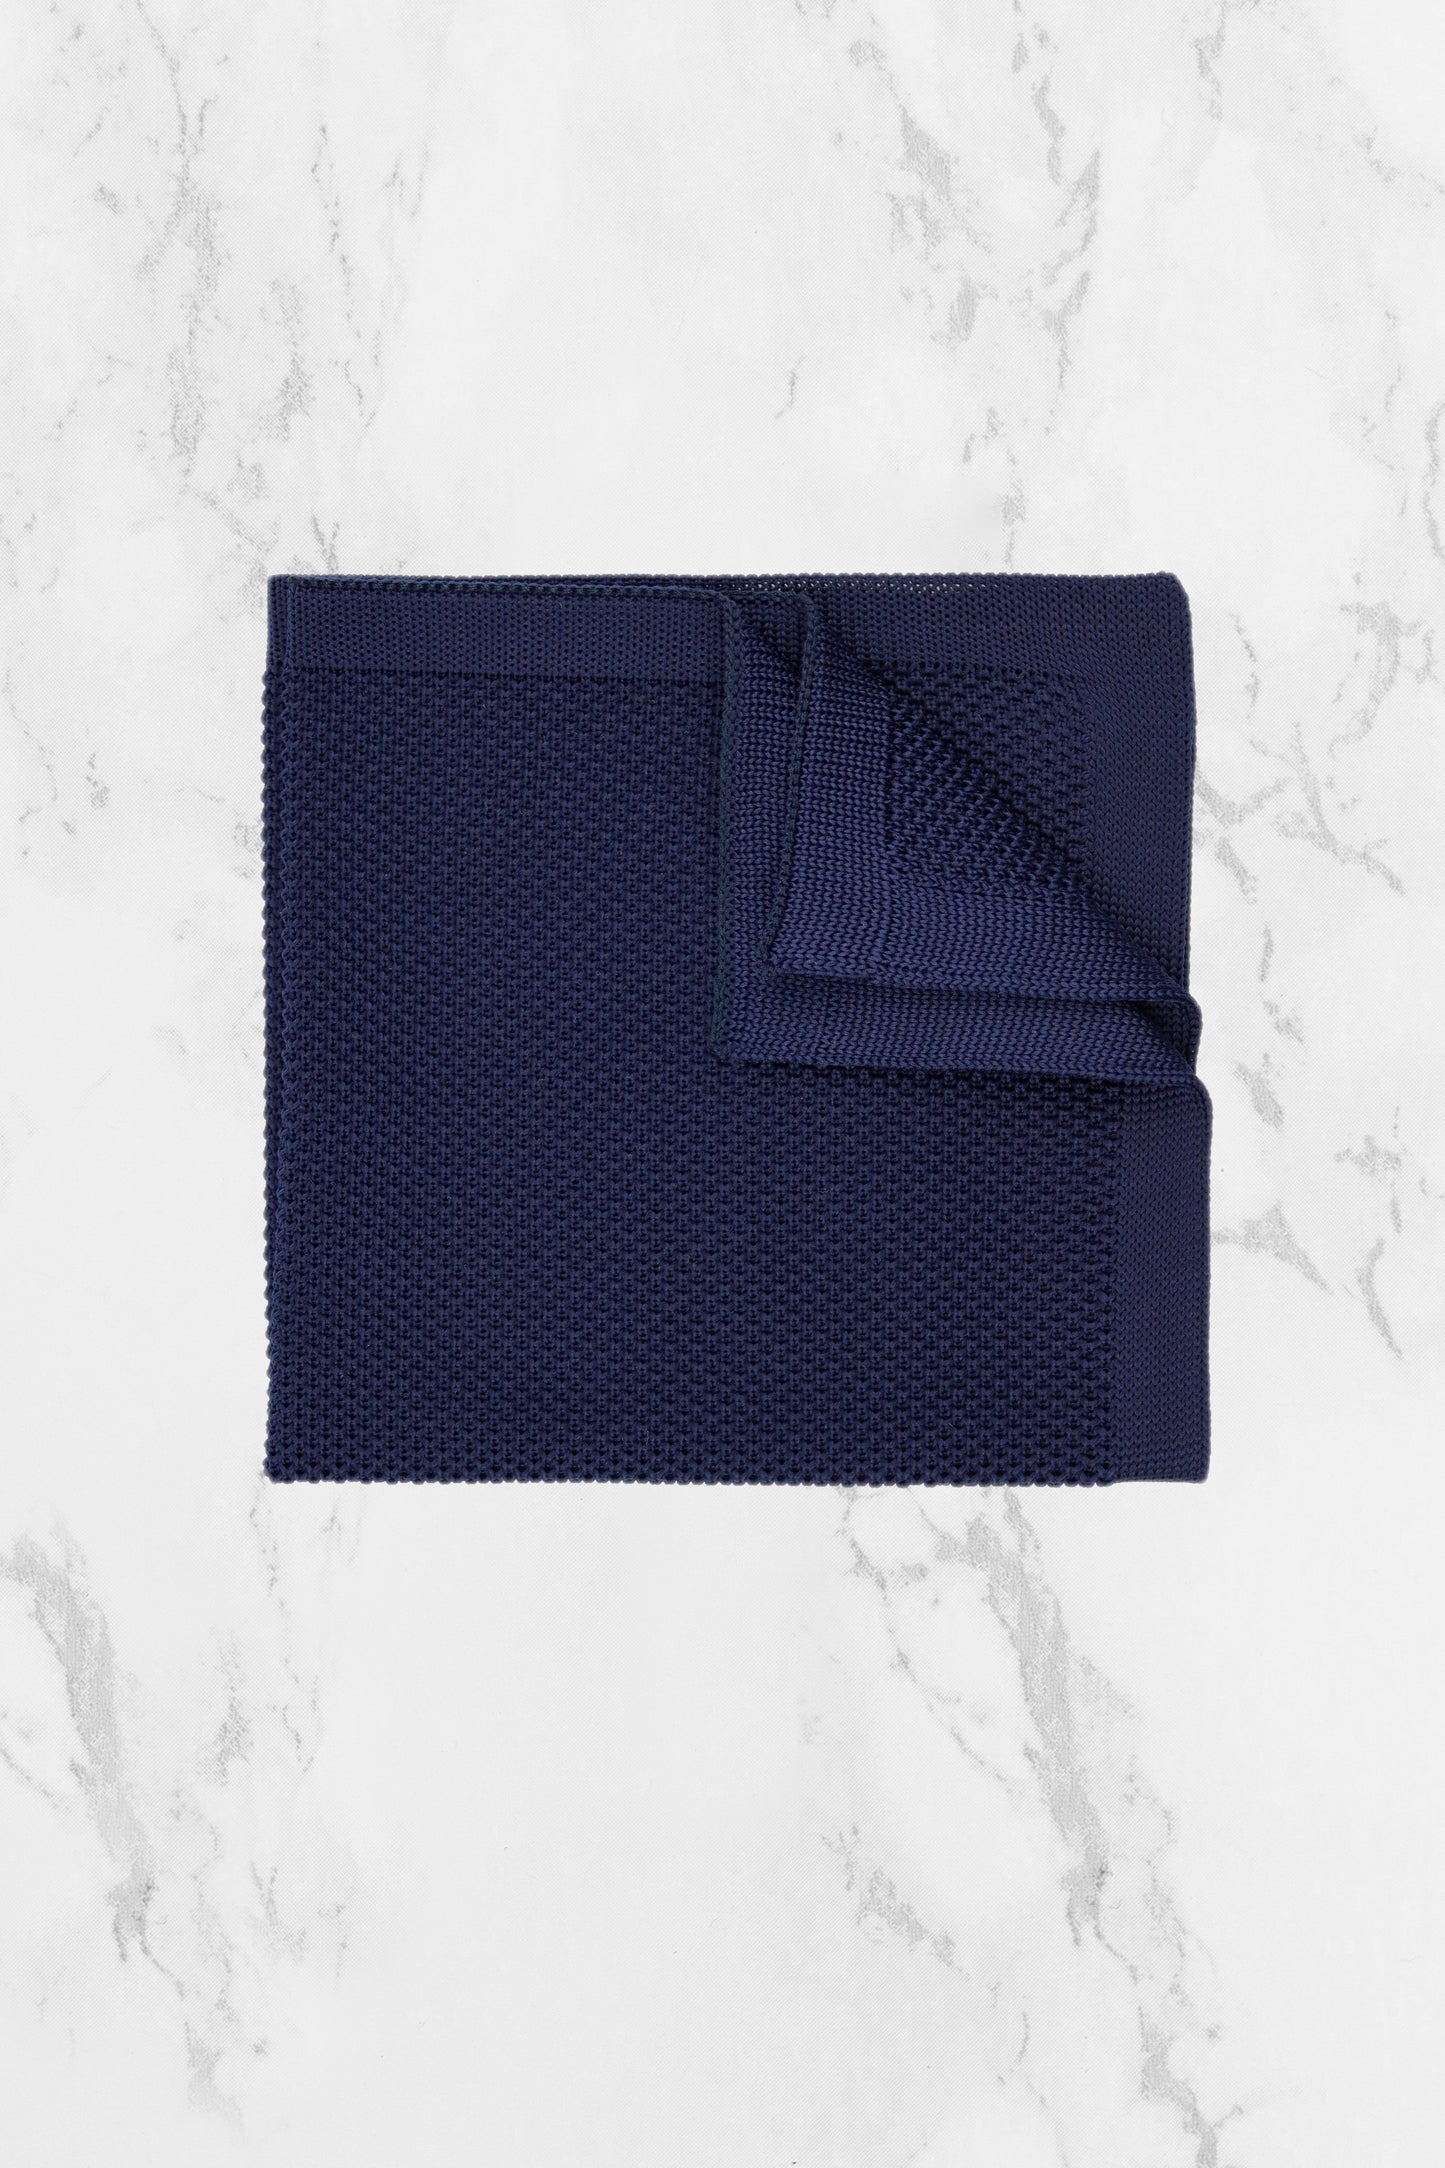 100% Polyester Diamond End Knitted Tie - Navy Blue